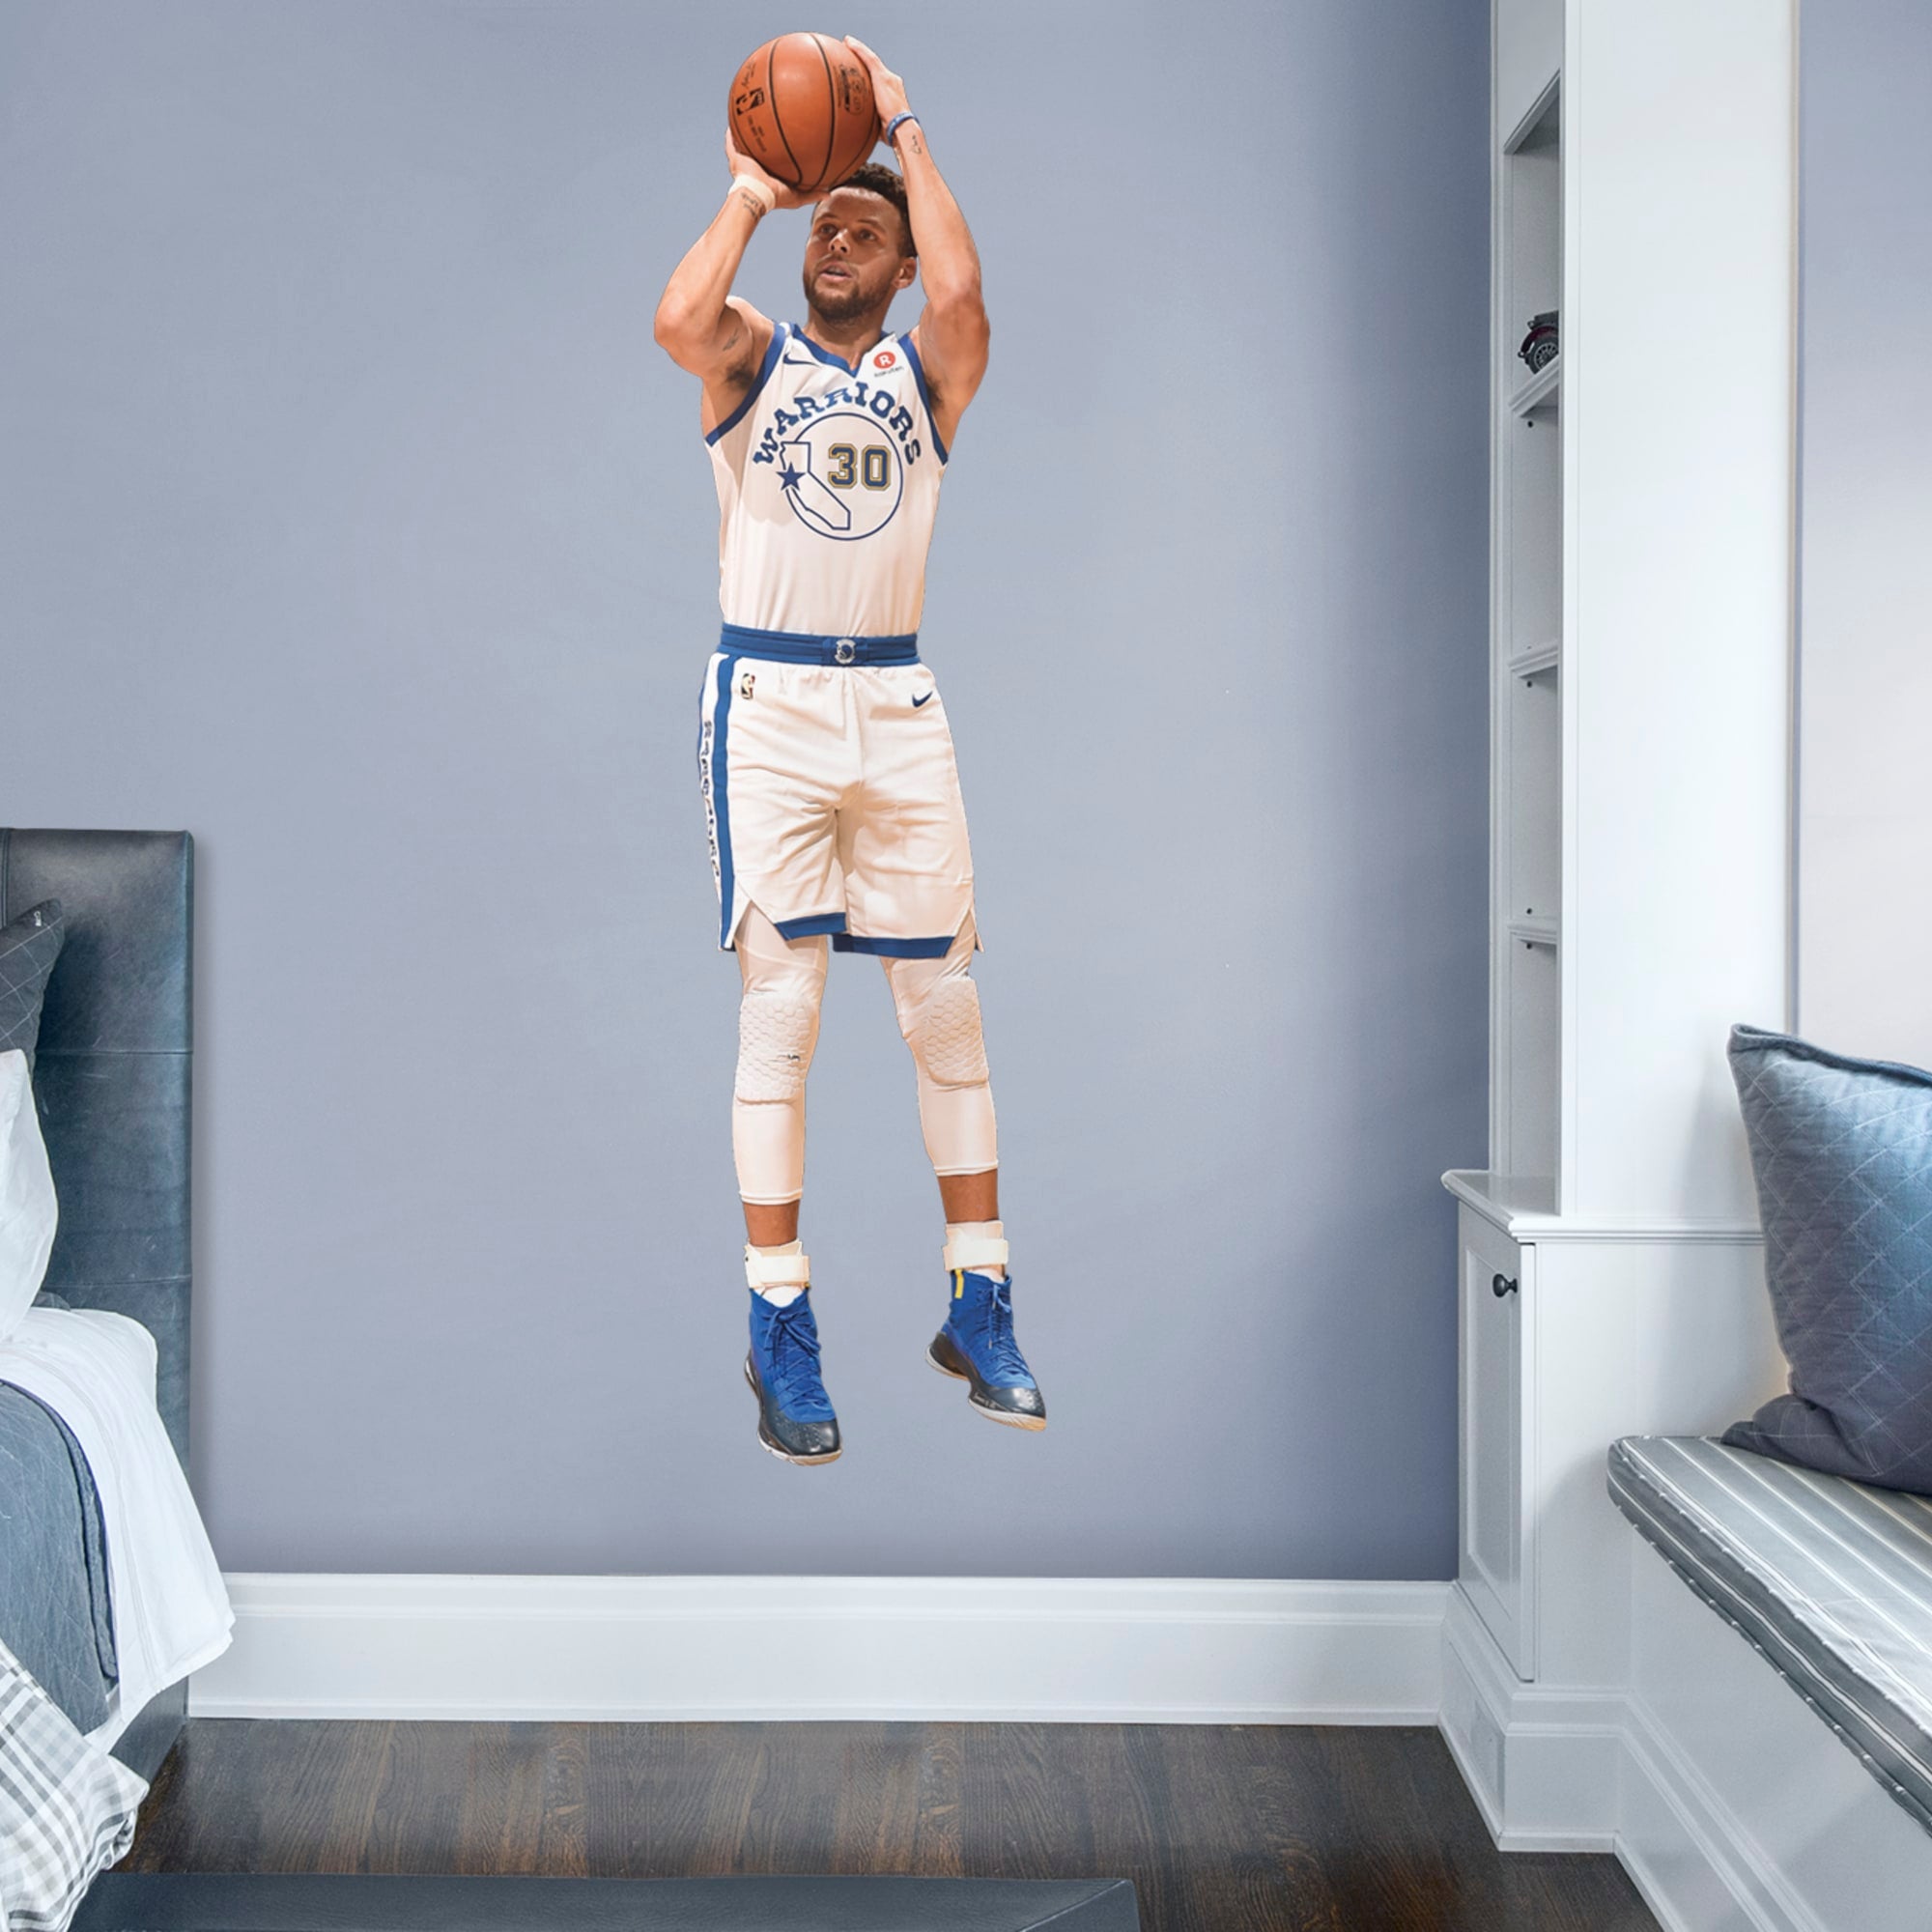 Stephen Curry for Golden State Warriors: Shooting - Officially Licensed NBA Removable Wall Decal Life-Size Athlete + 13 Decals (